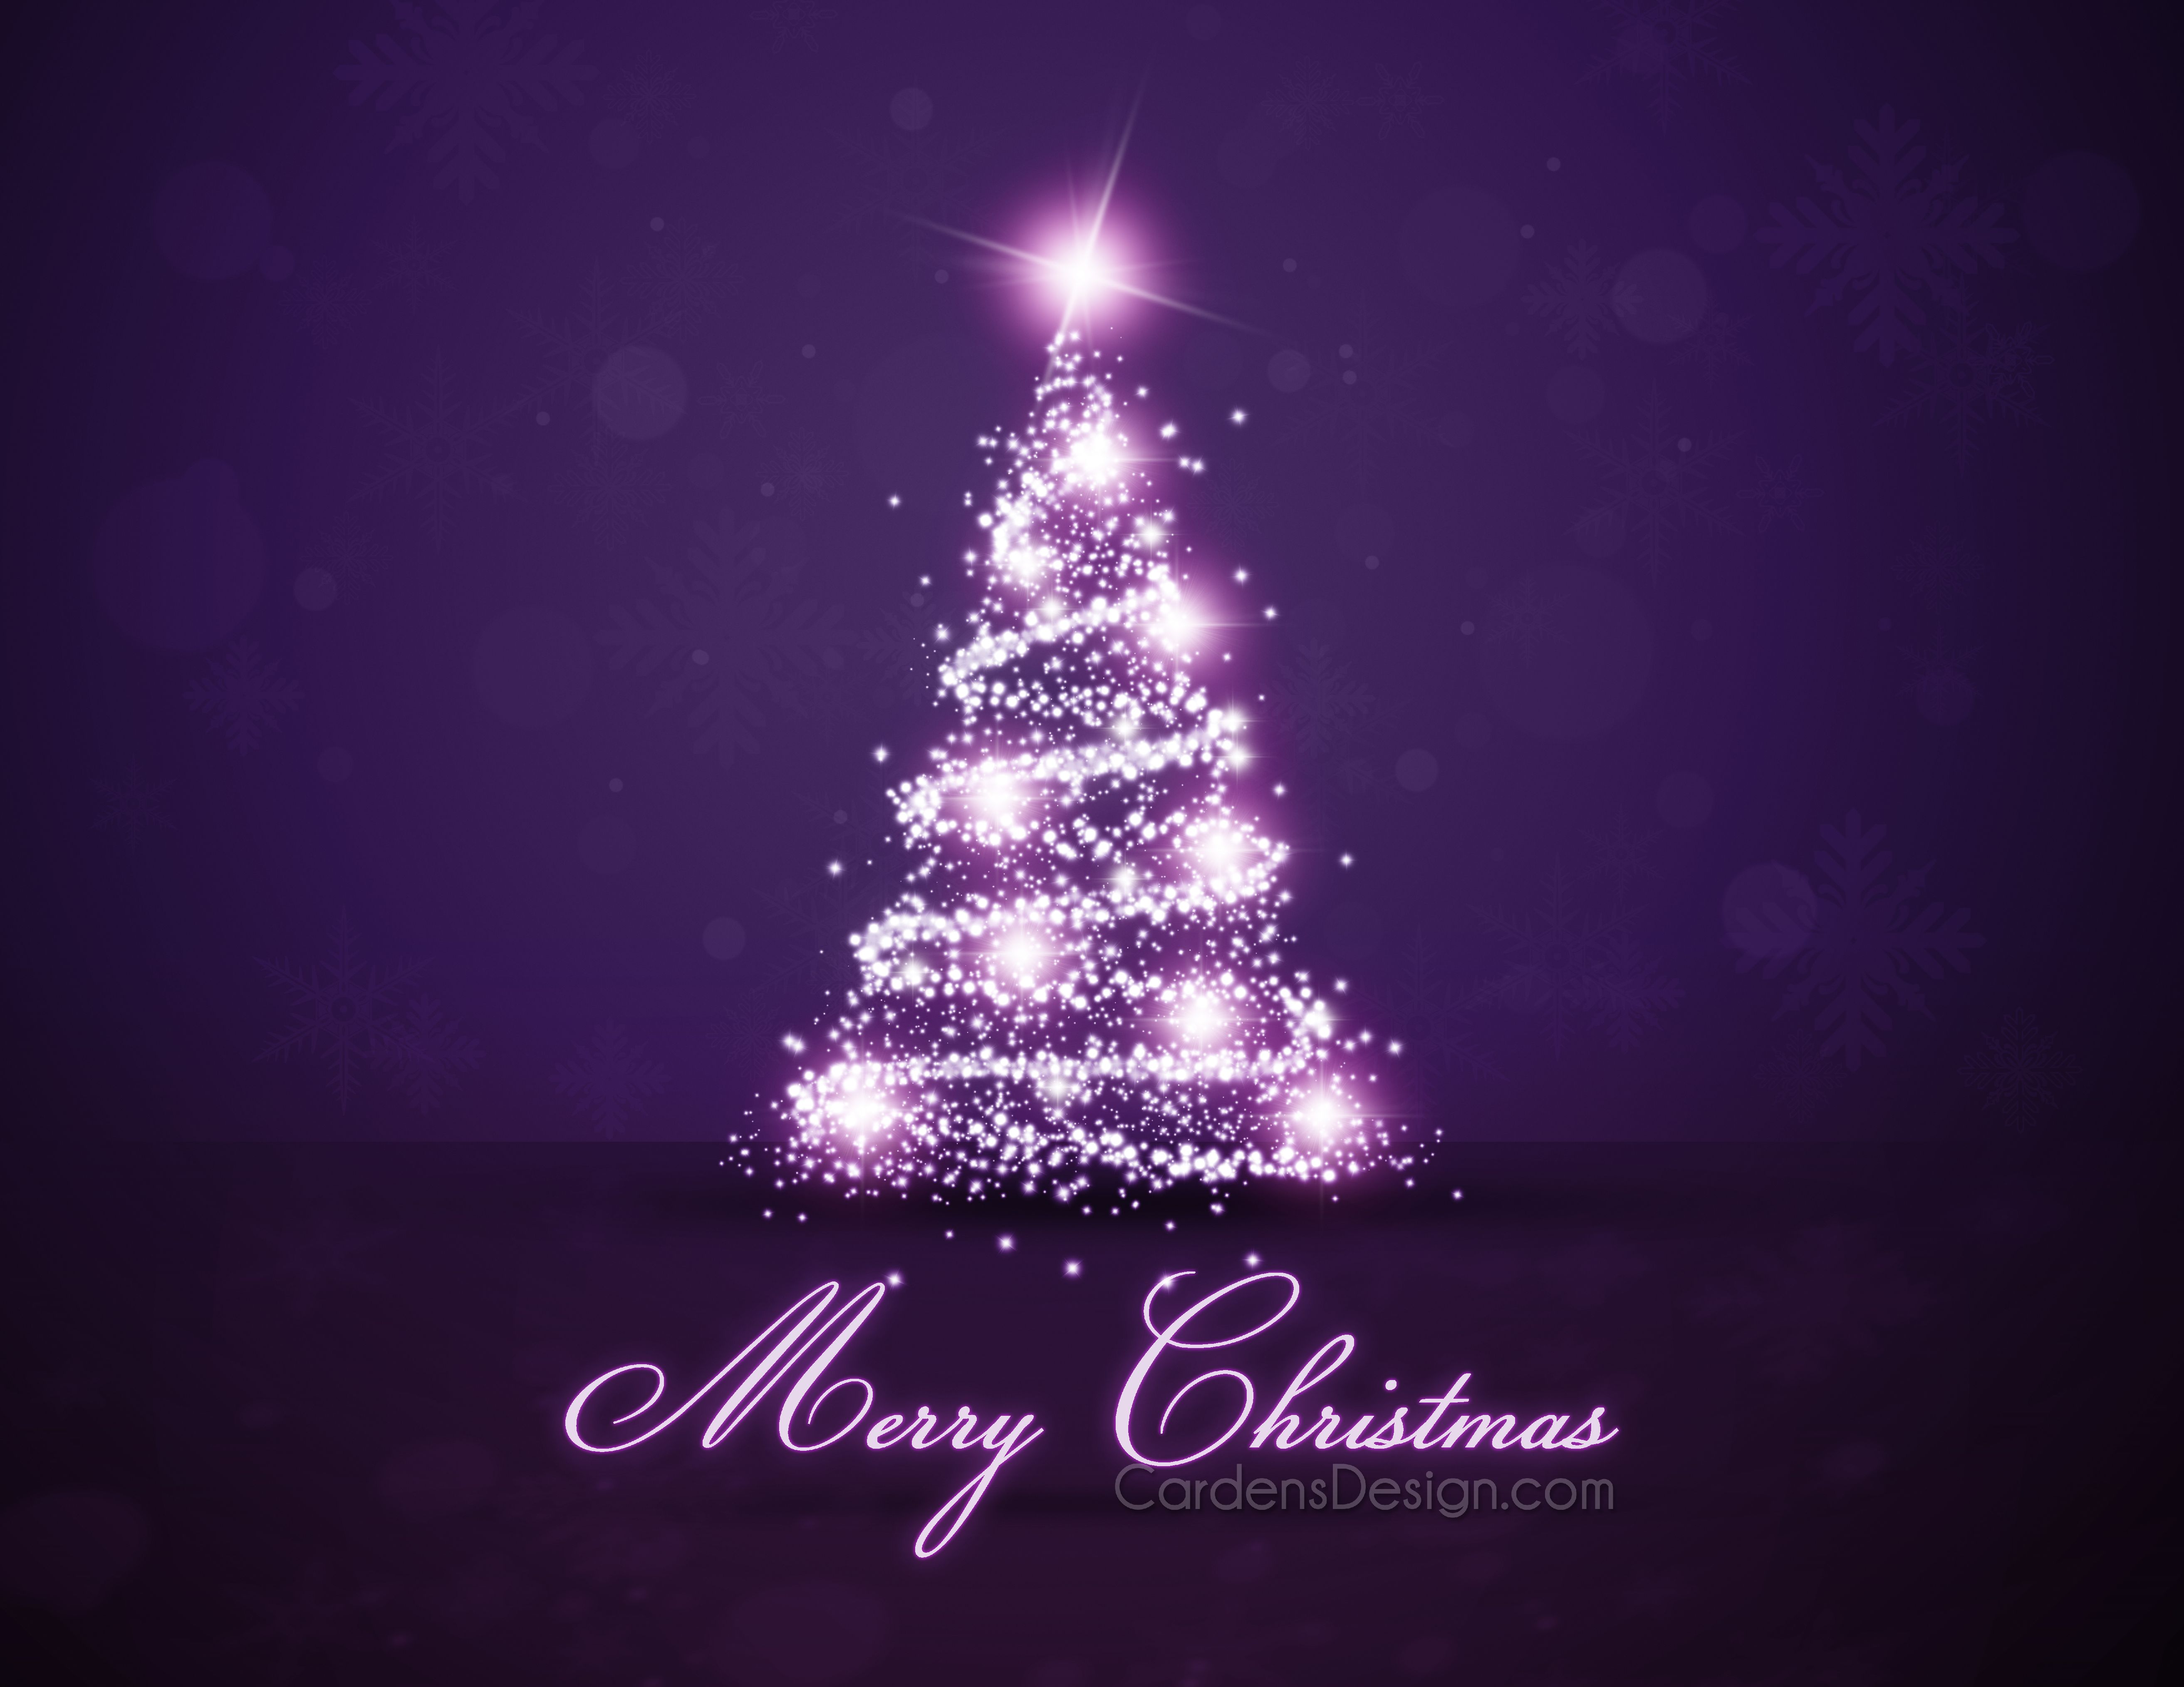 Share Purple Christmas Tree Wallpaper Gallery To The